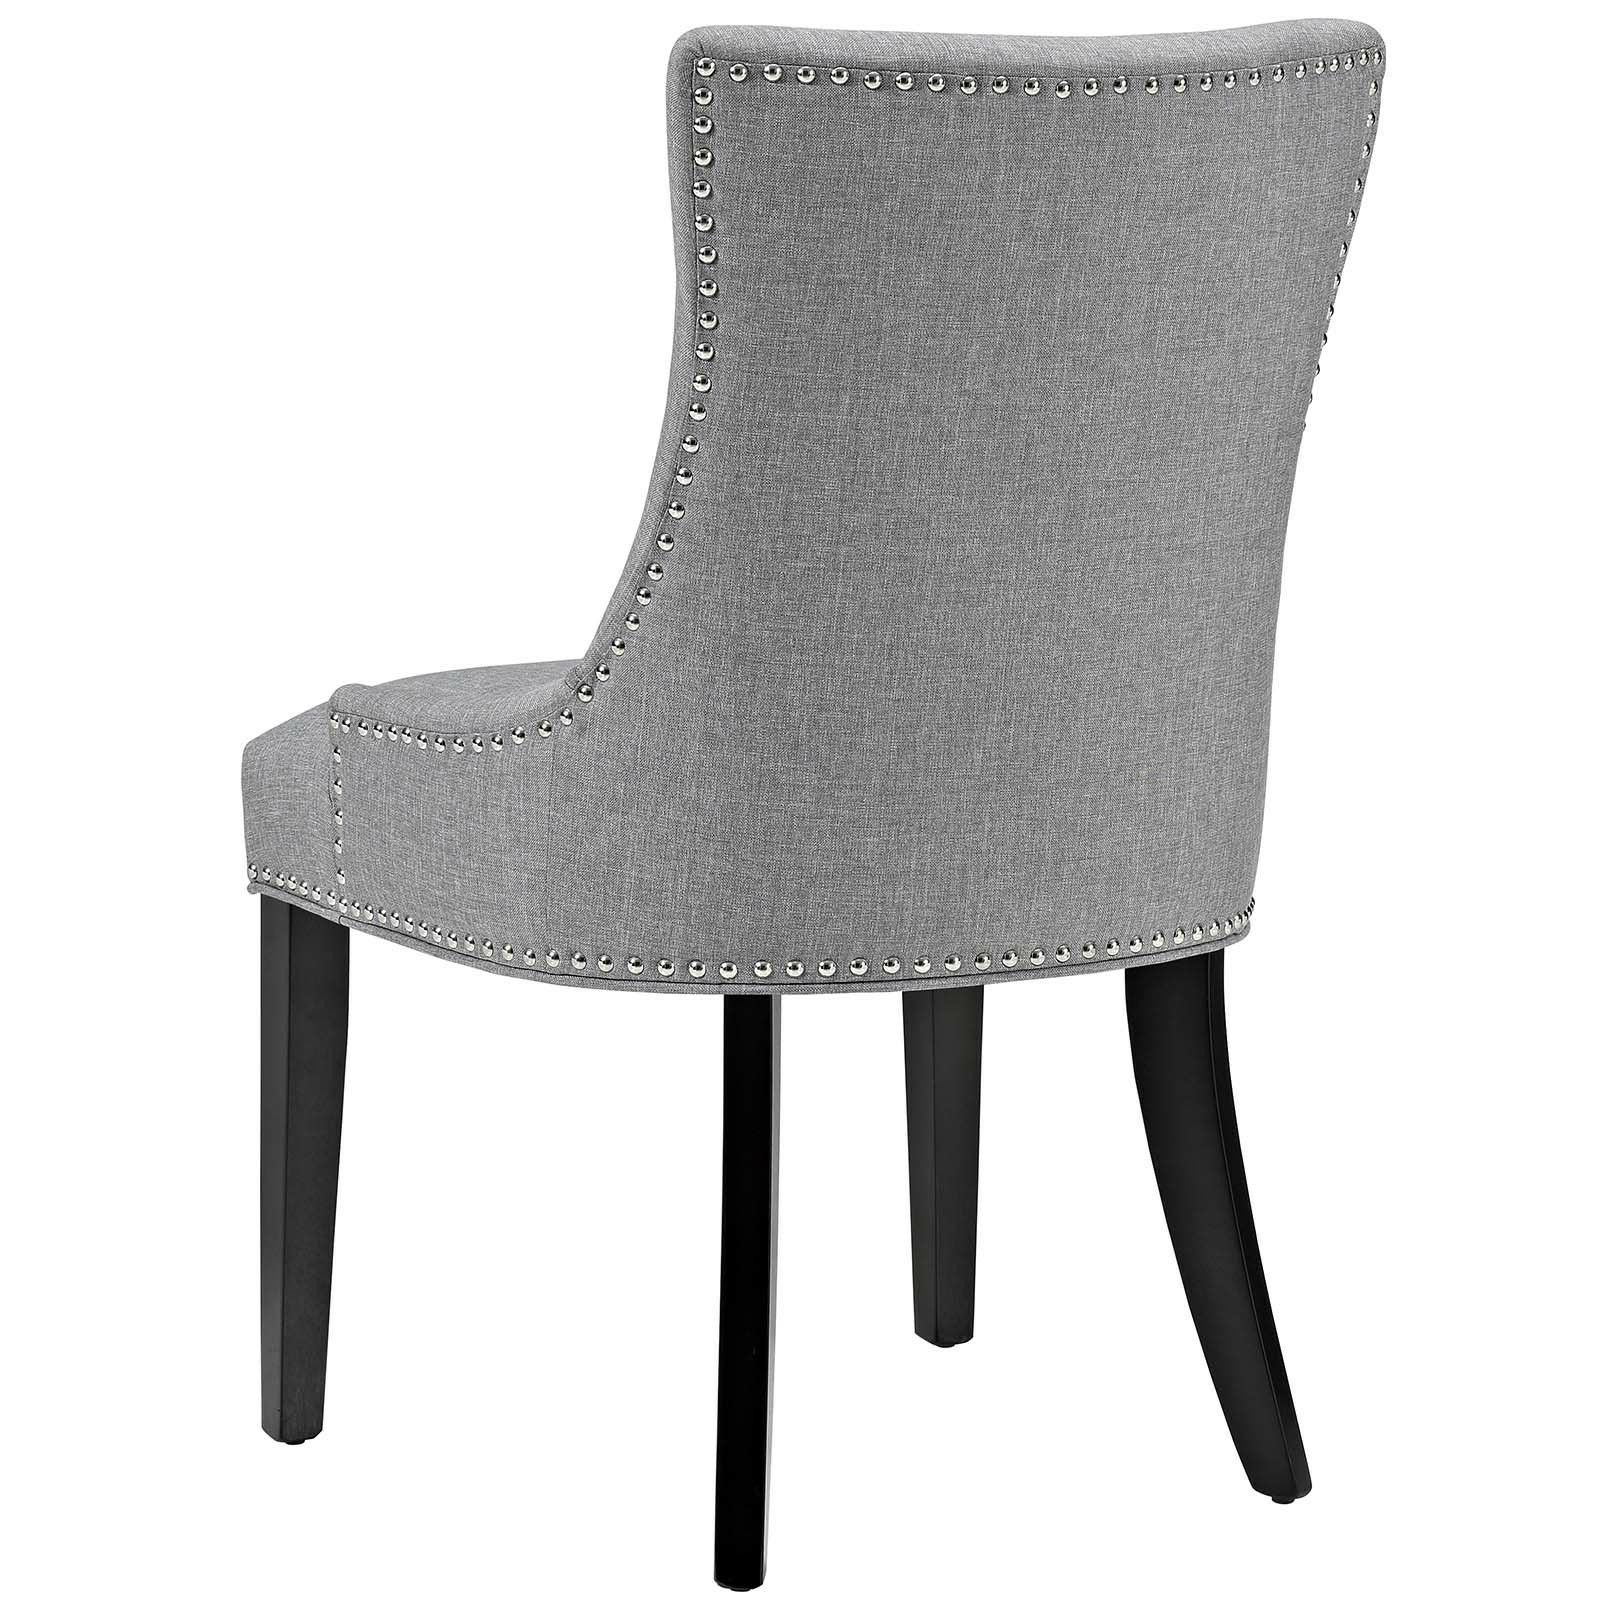 Popular Dark Gray Fabric Outdoor Patio Bar Chairs Sets For Upholstered Fabric Nailhead Parsons Dining Side Chairs In Light Gray (View 12 of 15)